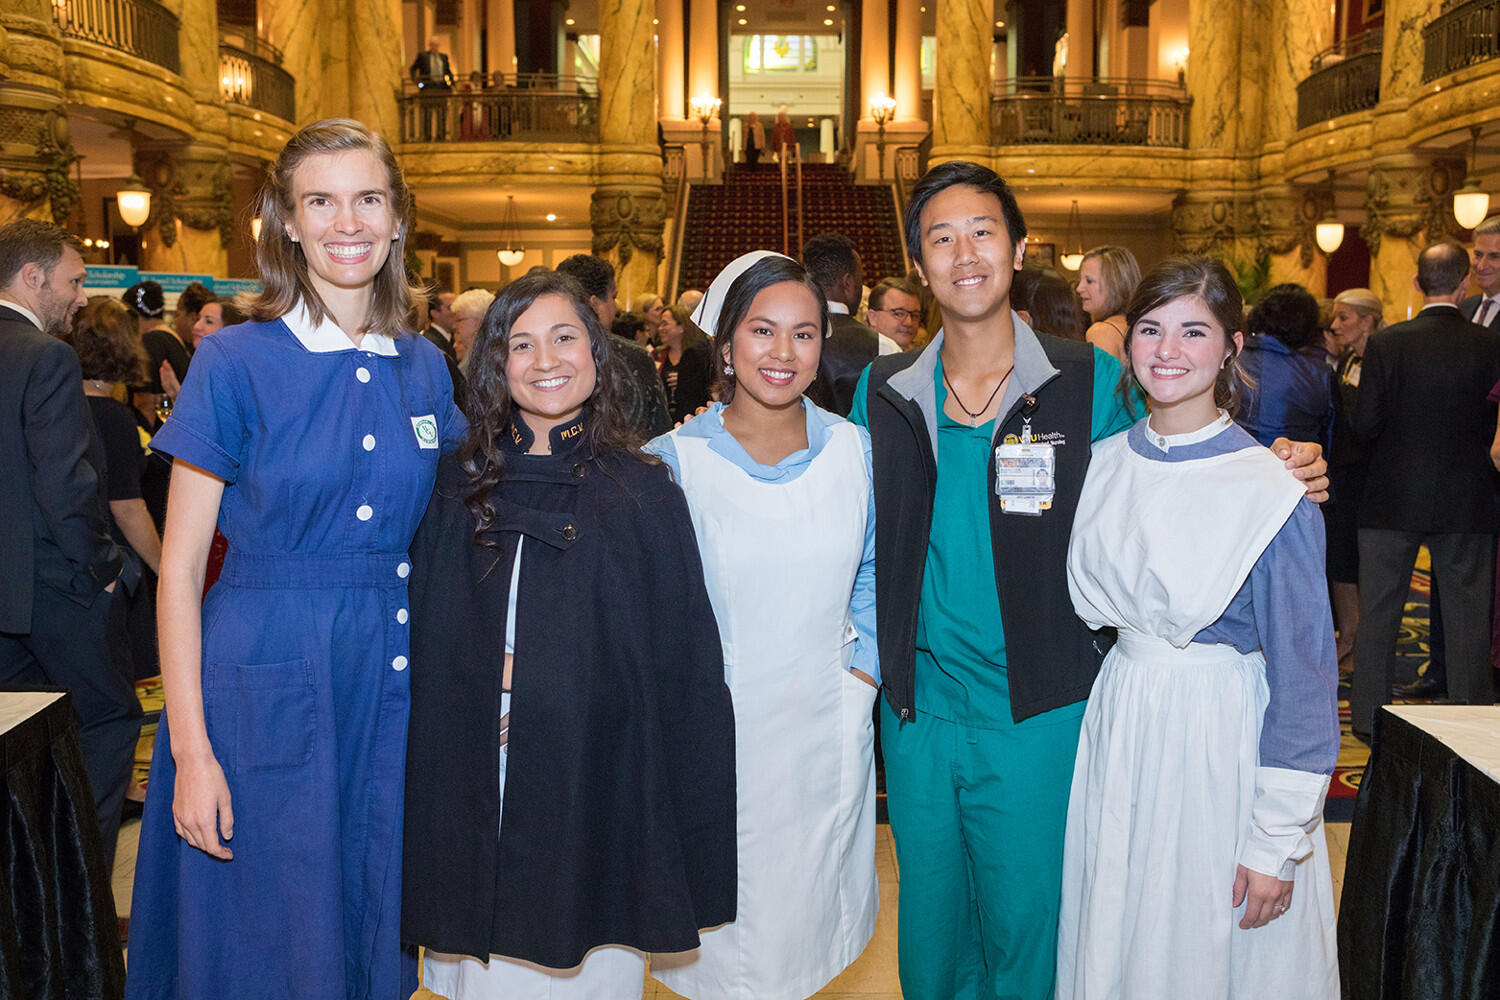 Students stand wearing a variety of nurse outfits